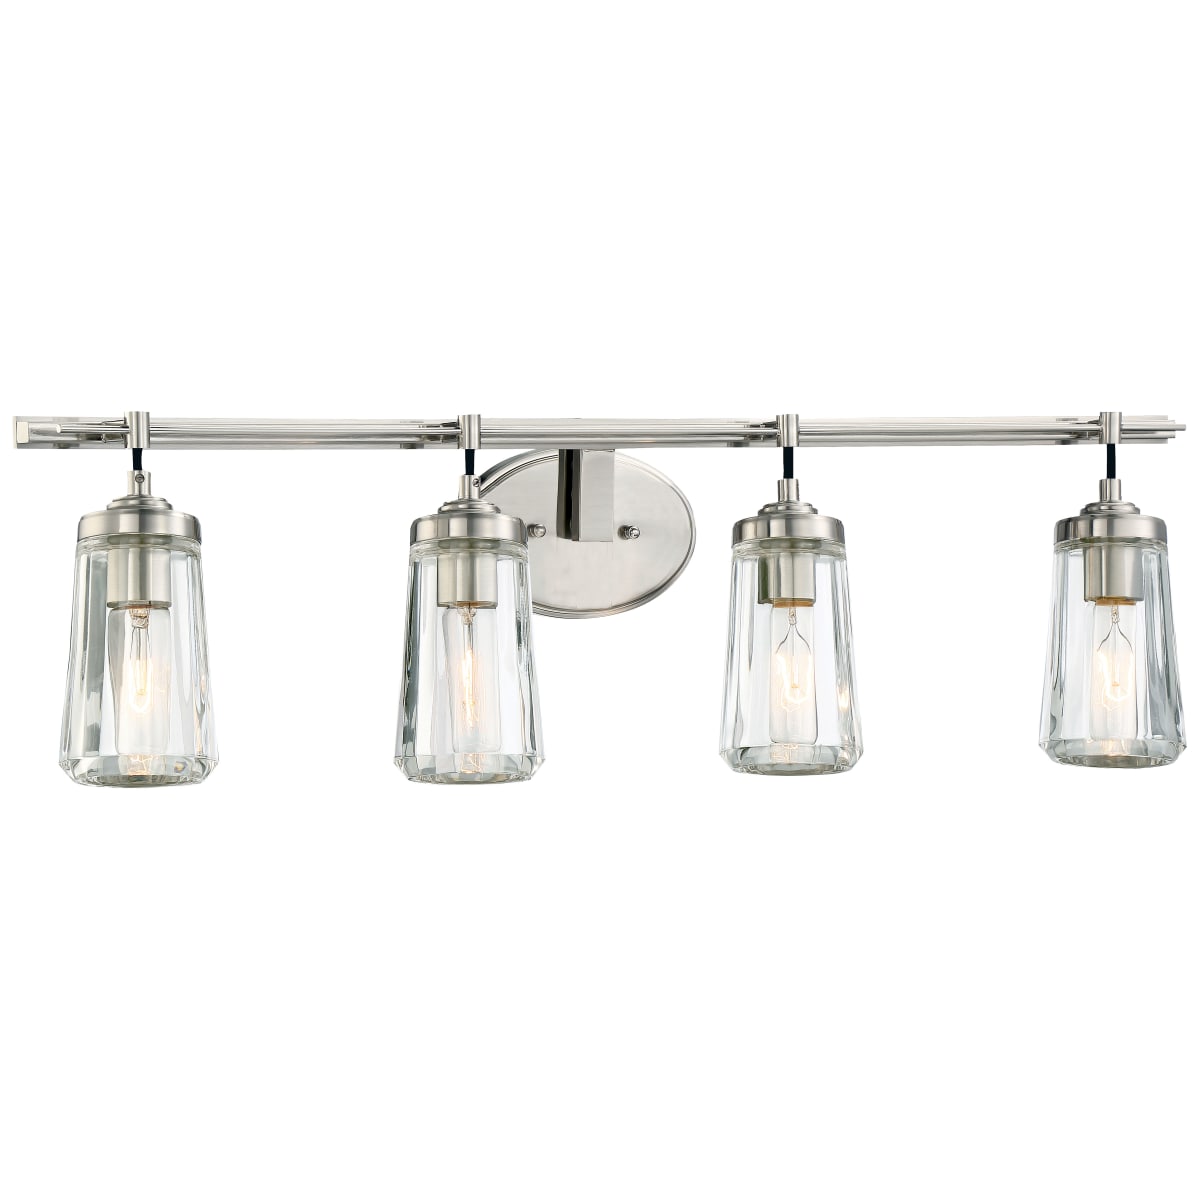 Minka Lavery 2304-84 Brushed Nickel 4 Light Vanity Light from the Poleis  Collection - LightingDirect.com